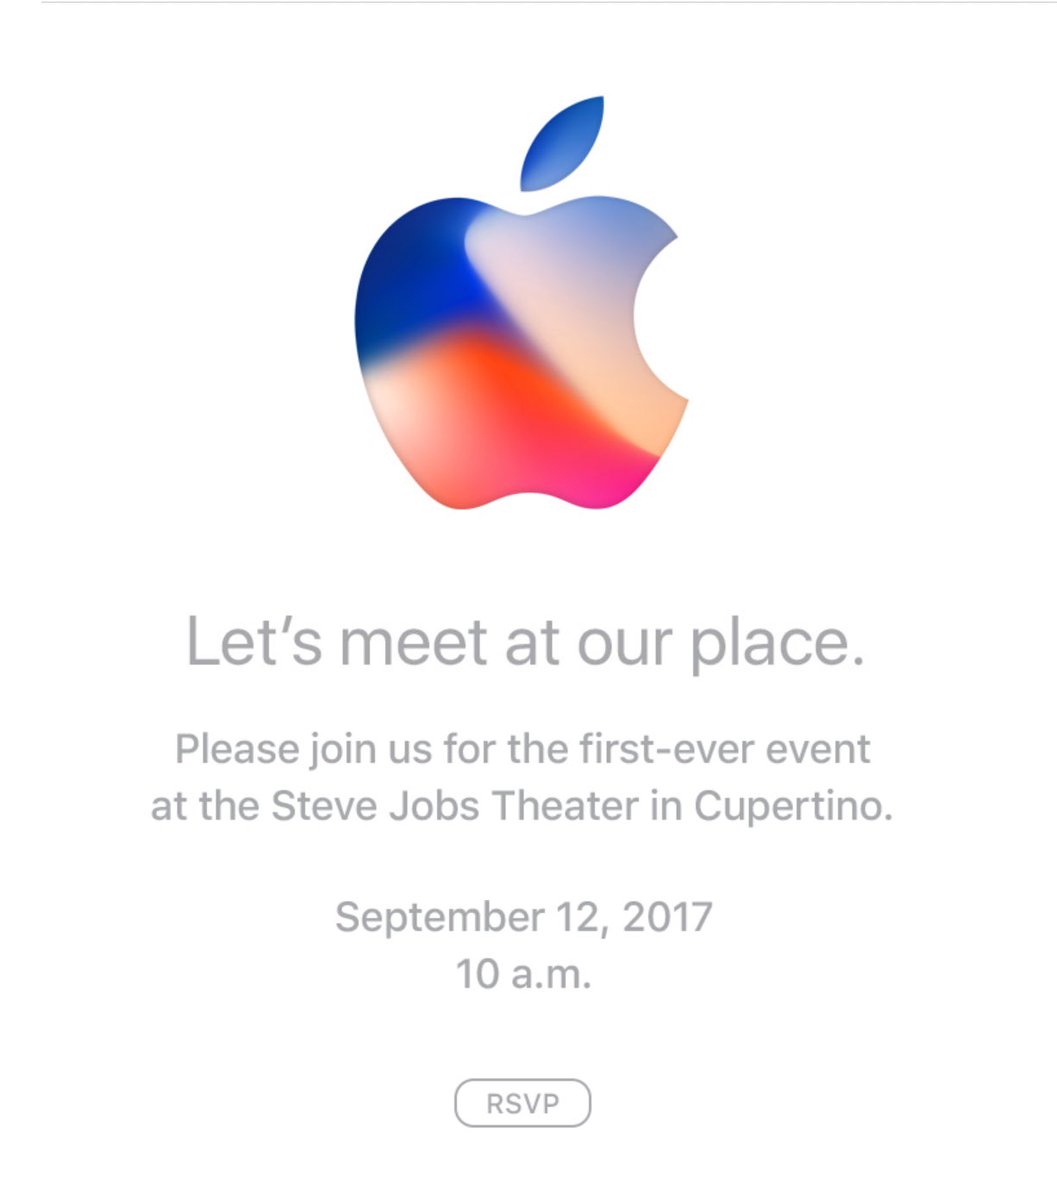 People are examining the Apple event invitation for iPhone clues